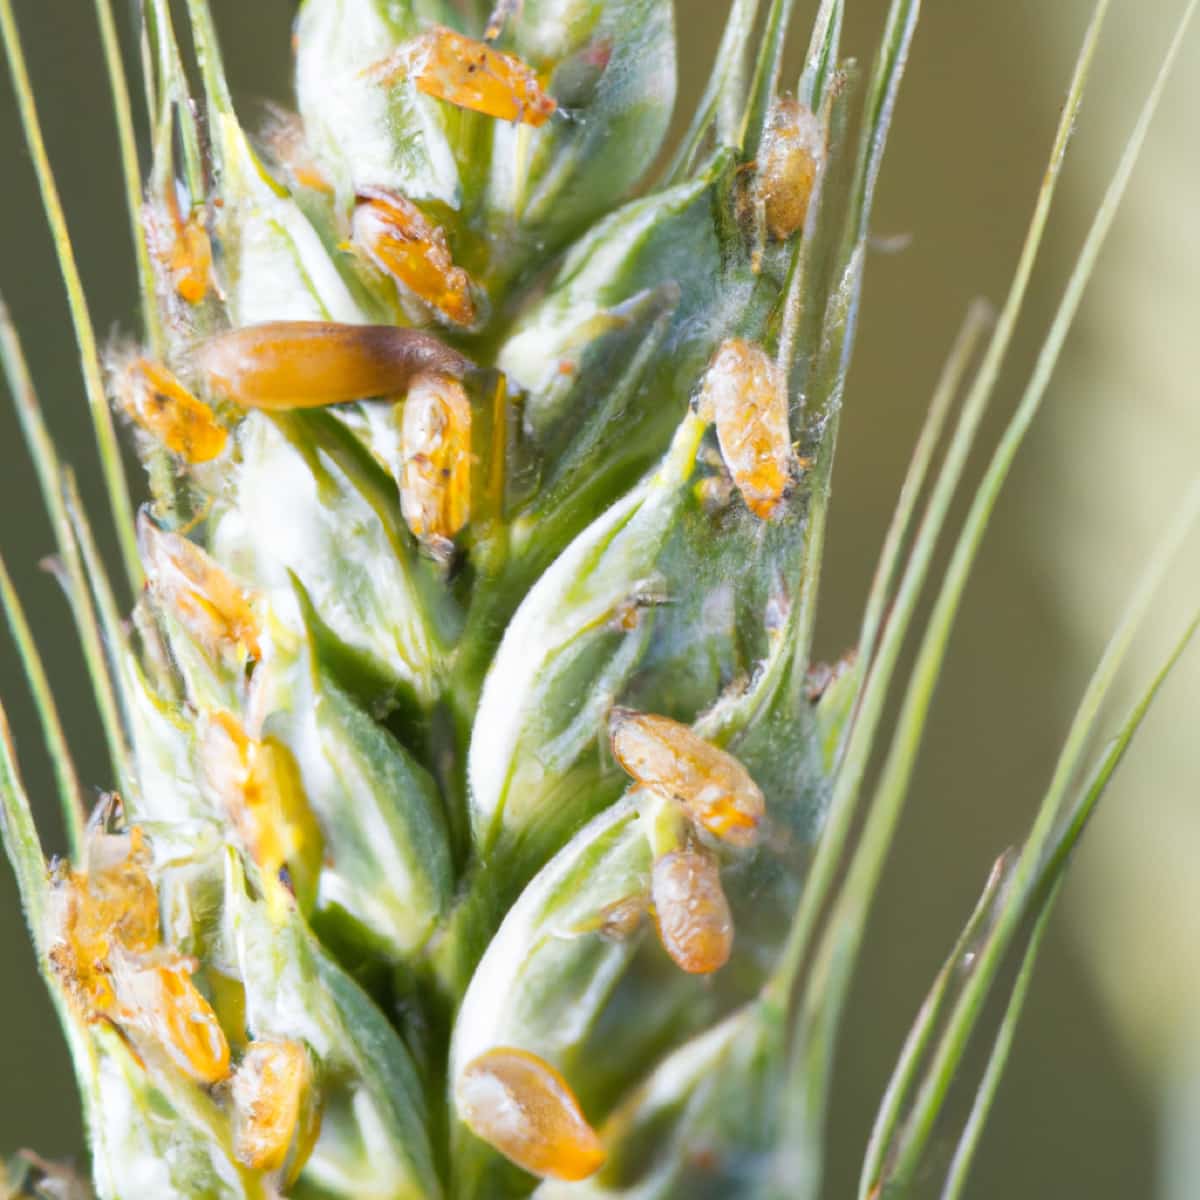 Aphids on Wheat Plant